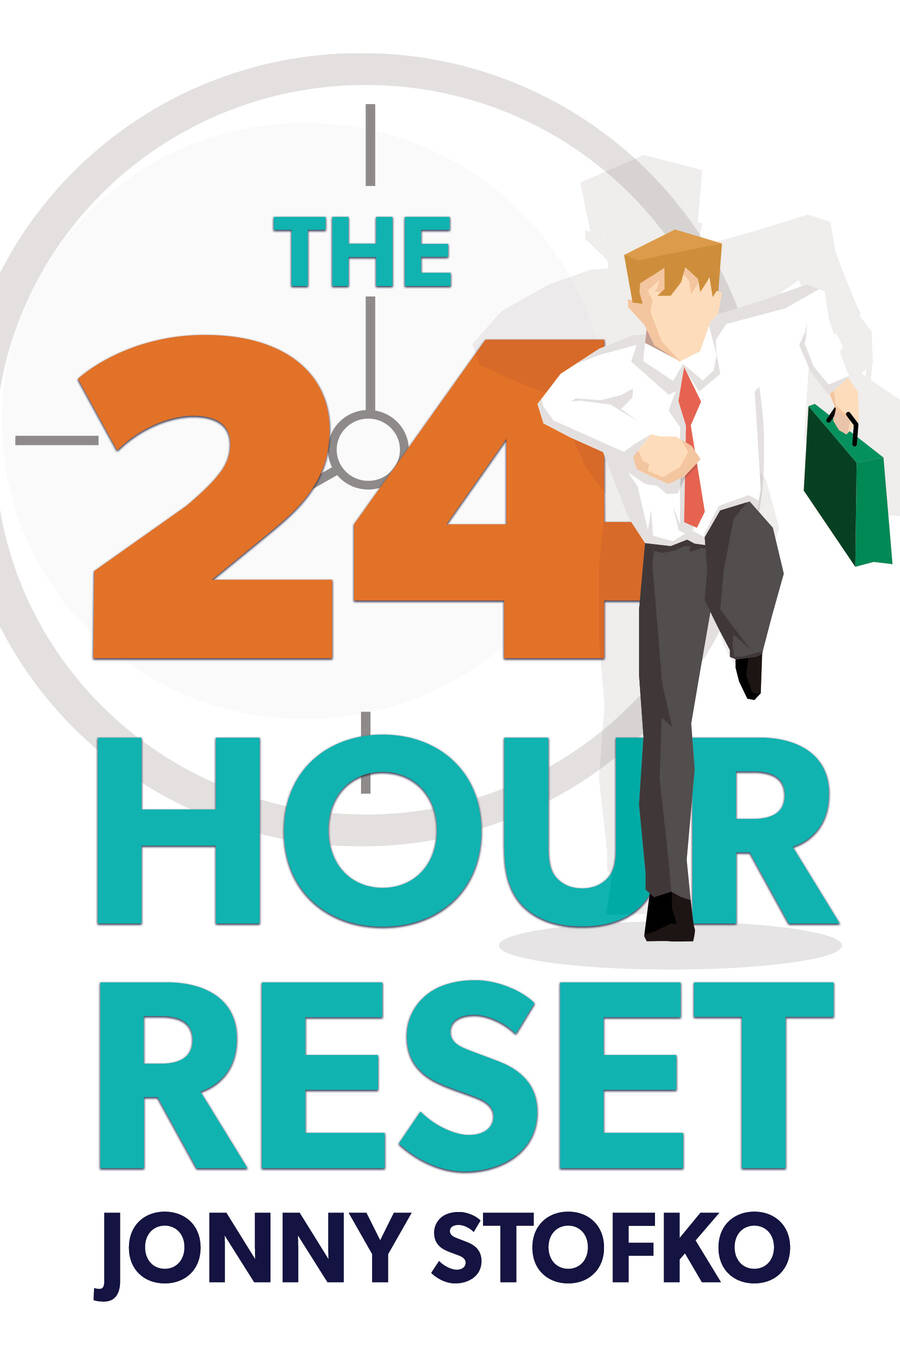 The 24 Hour Reset